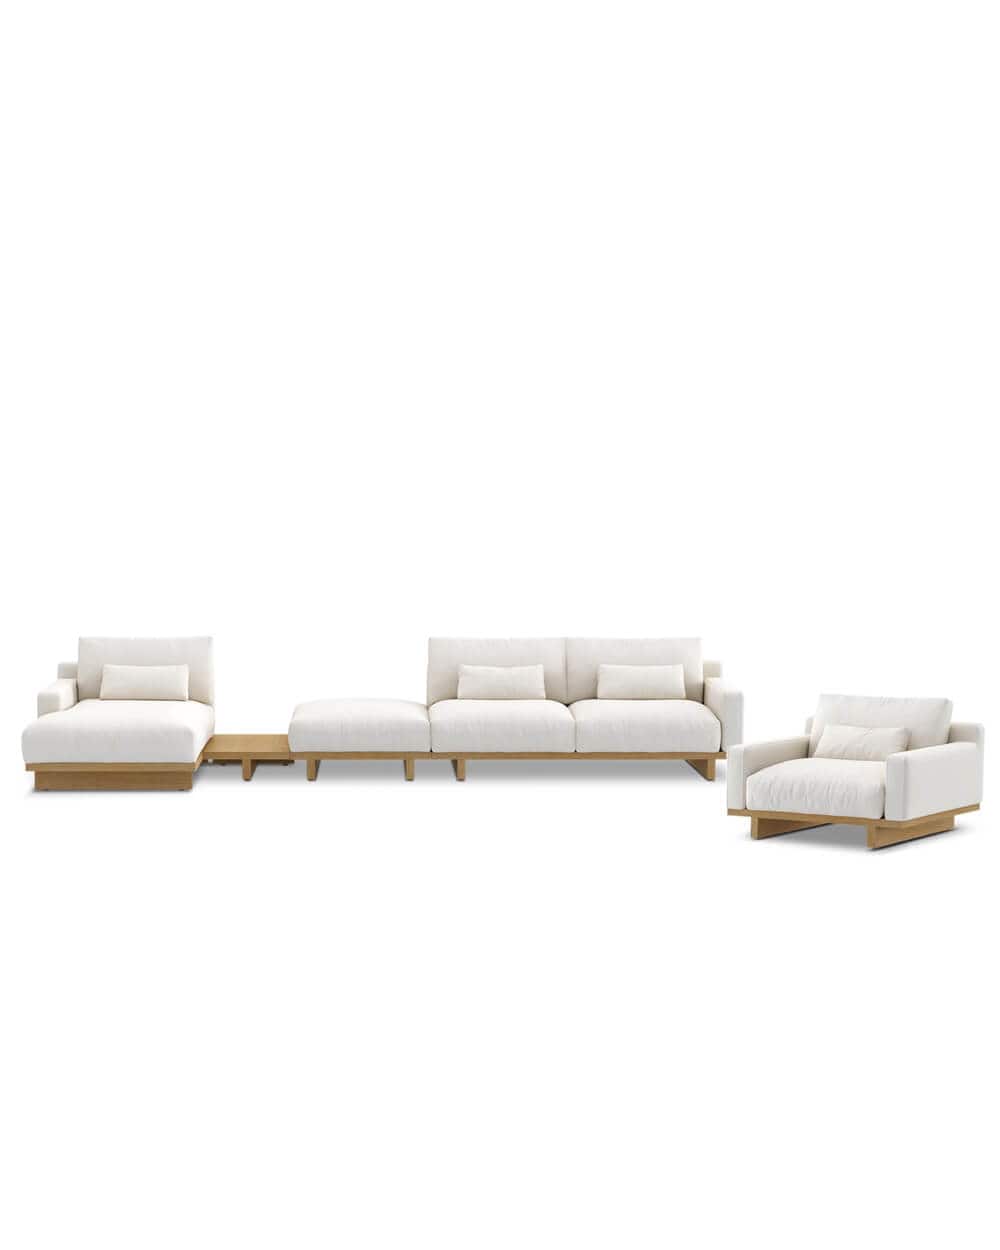 Citizenry Mori Build-Your-Own Living Room Set, 4-5 Seater